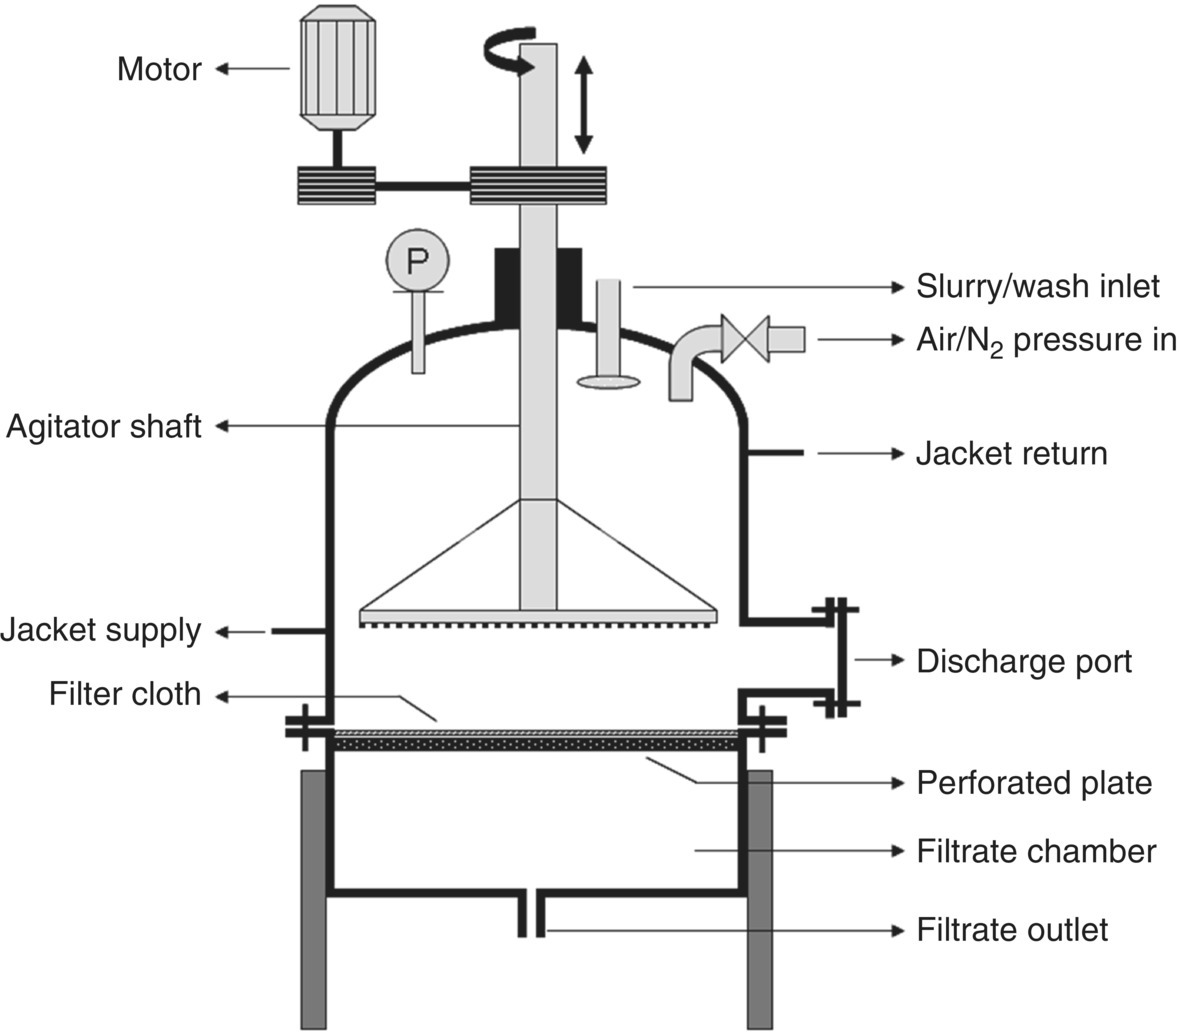 Diagram displaying the cross-sectional representation of a filter dryer with parts labeled motor, agitator shaft, jacket supply, filter cloth, slurry/wash inlet, air/N2 pressure in, jacket return, discharge port, etc.